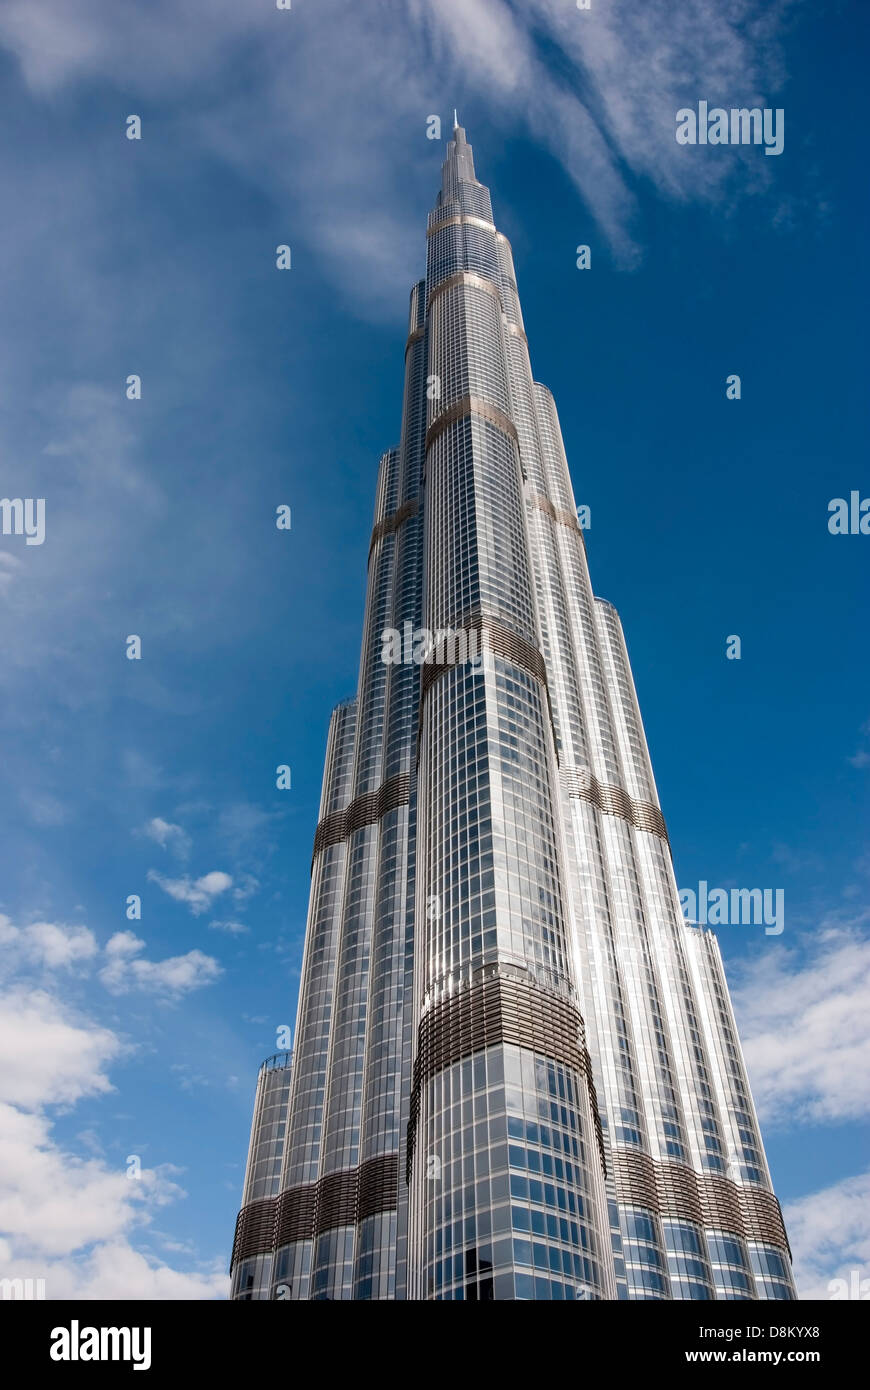 The Magnificent Burj Khalifa The Tallest Building in the World Stock Photo